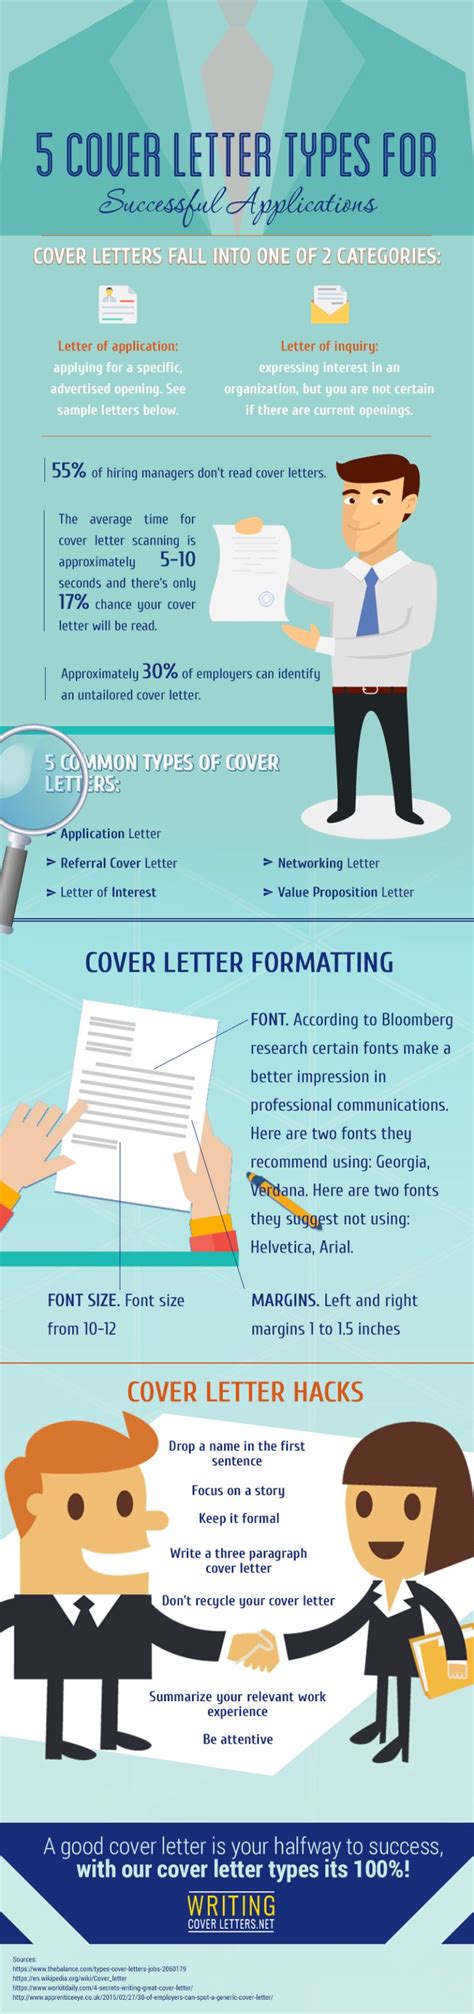 An application letter is also called cover letter, being your first introduction it is of great importance and should represent you in a best way, giving your appropriate picture. There are many cover letter types and structure ...